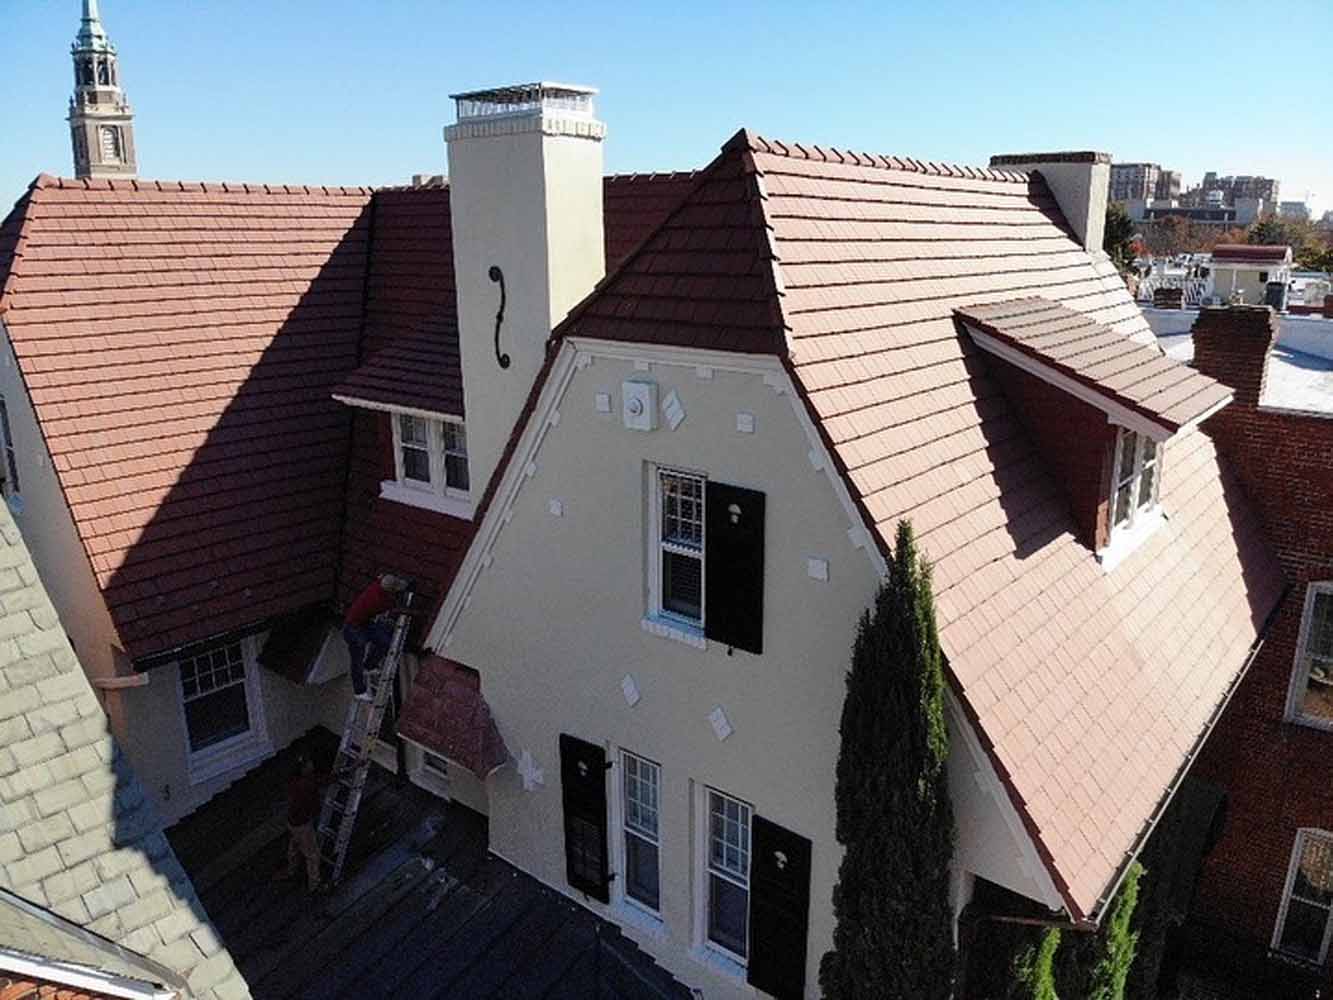 Beautiful and unique Ludowici terracotta roof tiles on a historic Richmond, VA home.